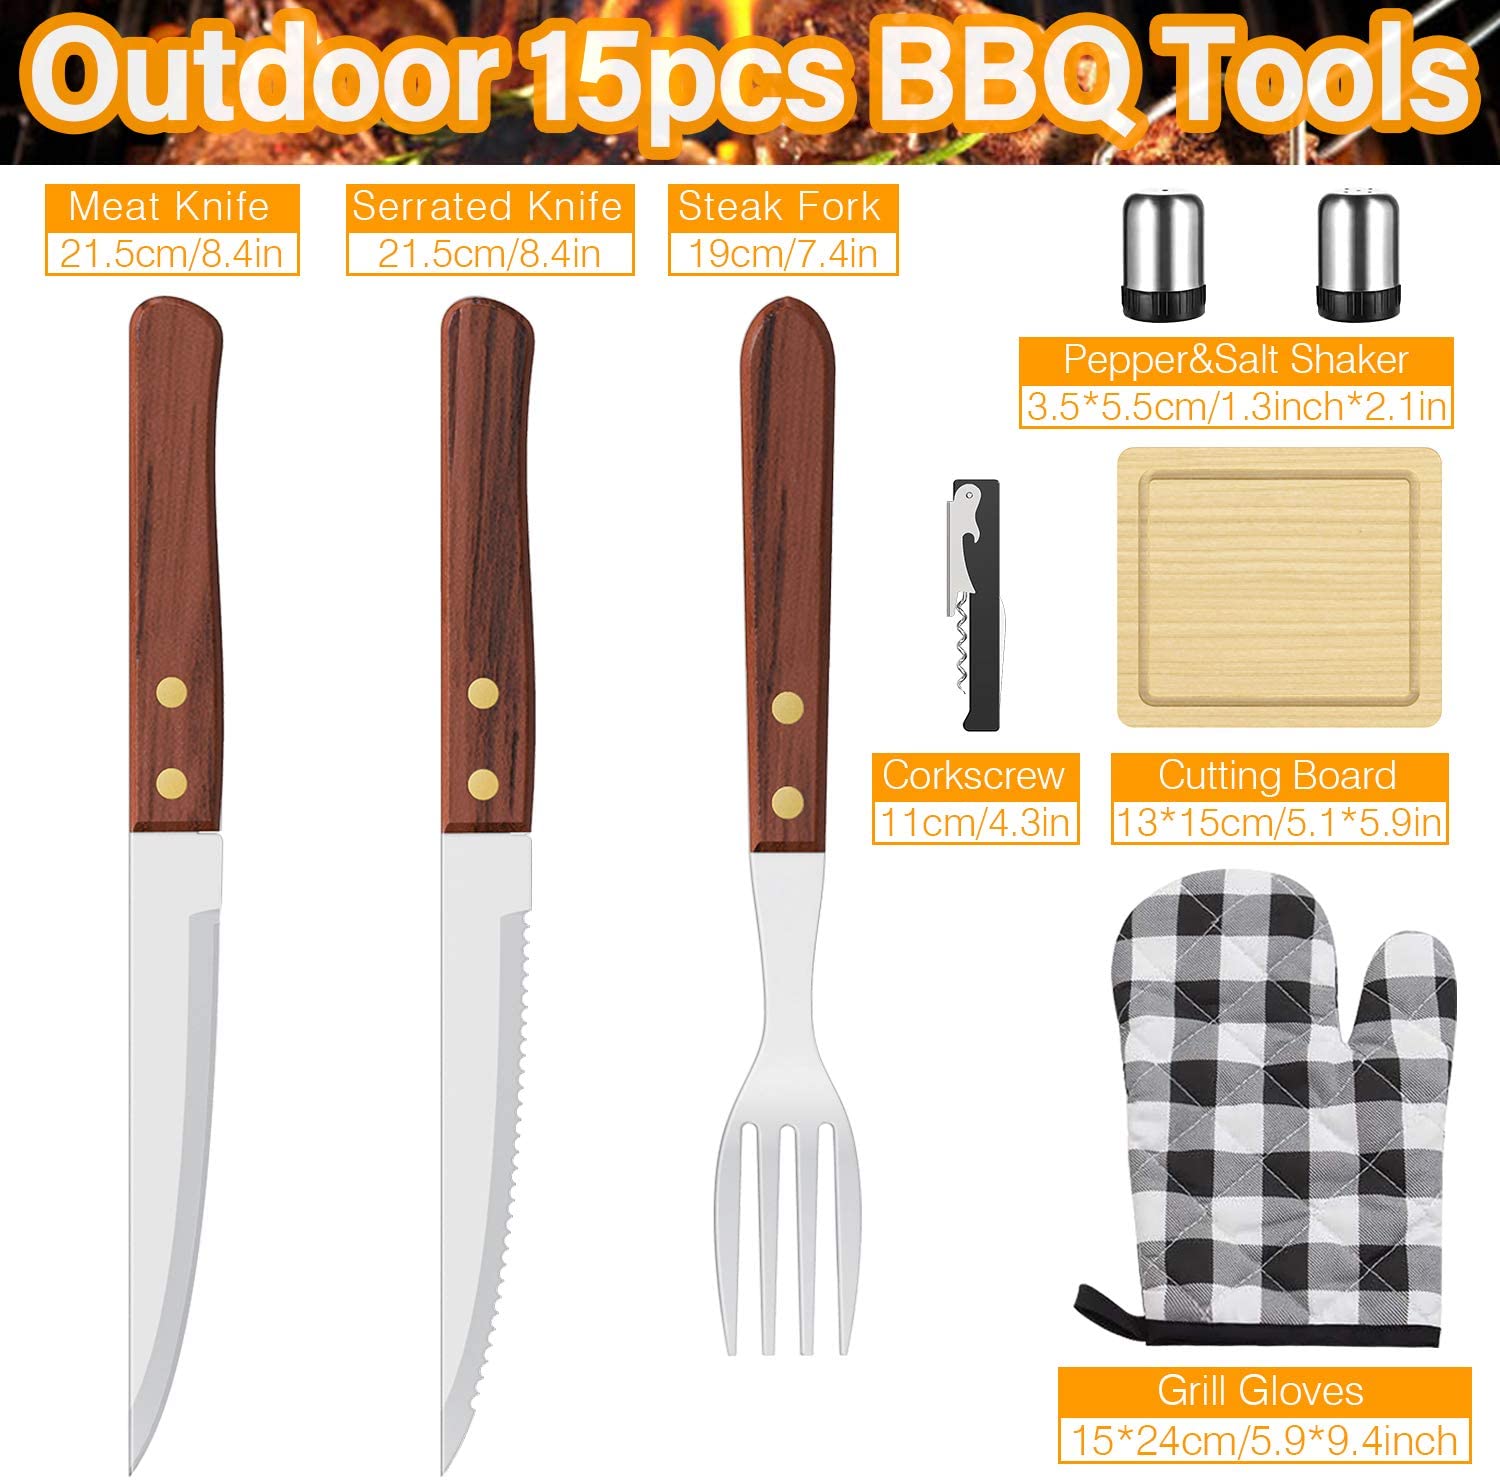 AISITIN BBQ Grill Accessories with Insulated Cooler Bag, Grill Utensils Set BBQ Grilling Accessories BBQ Tools Set, Stainless Steel Grill Set for Smoker, Camping, Kitchen Grill Tool Set for Men - image 5 of 9